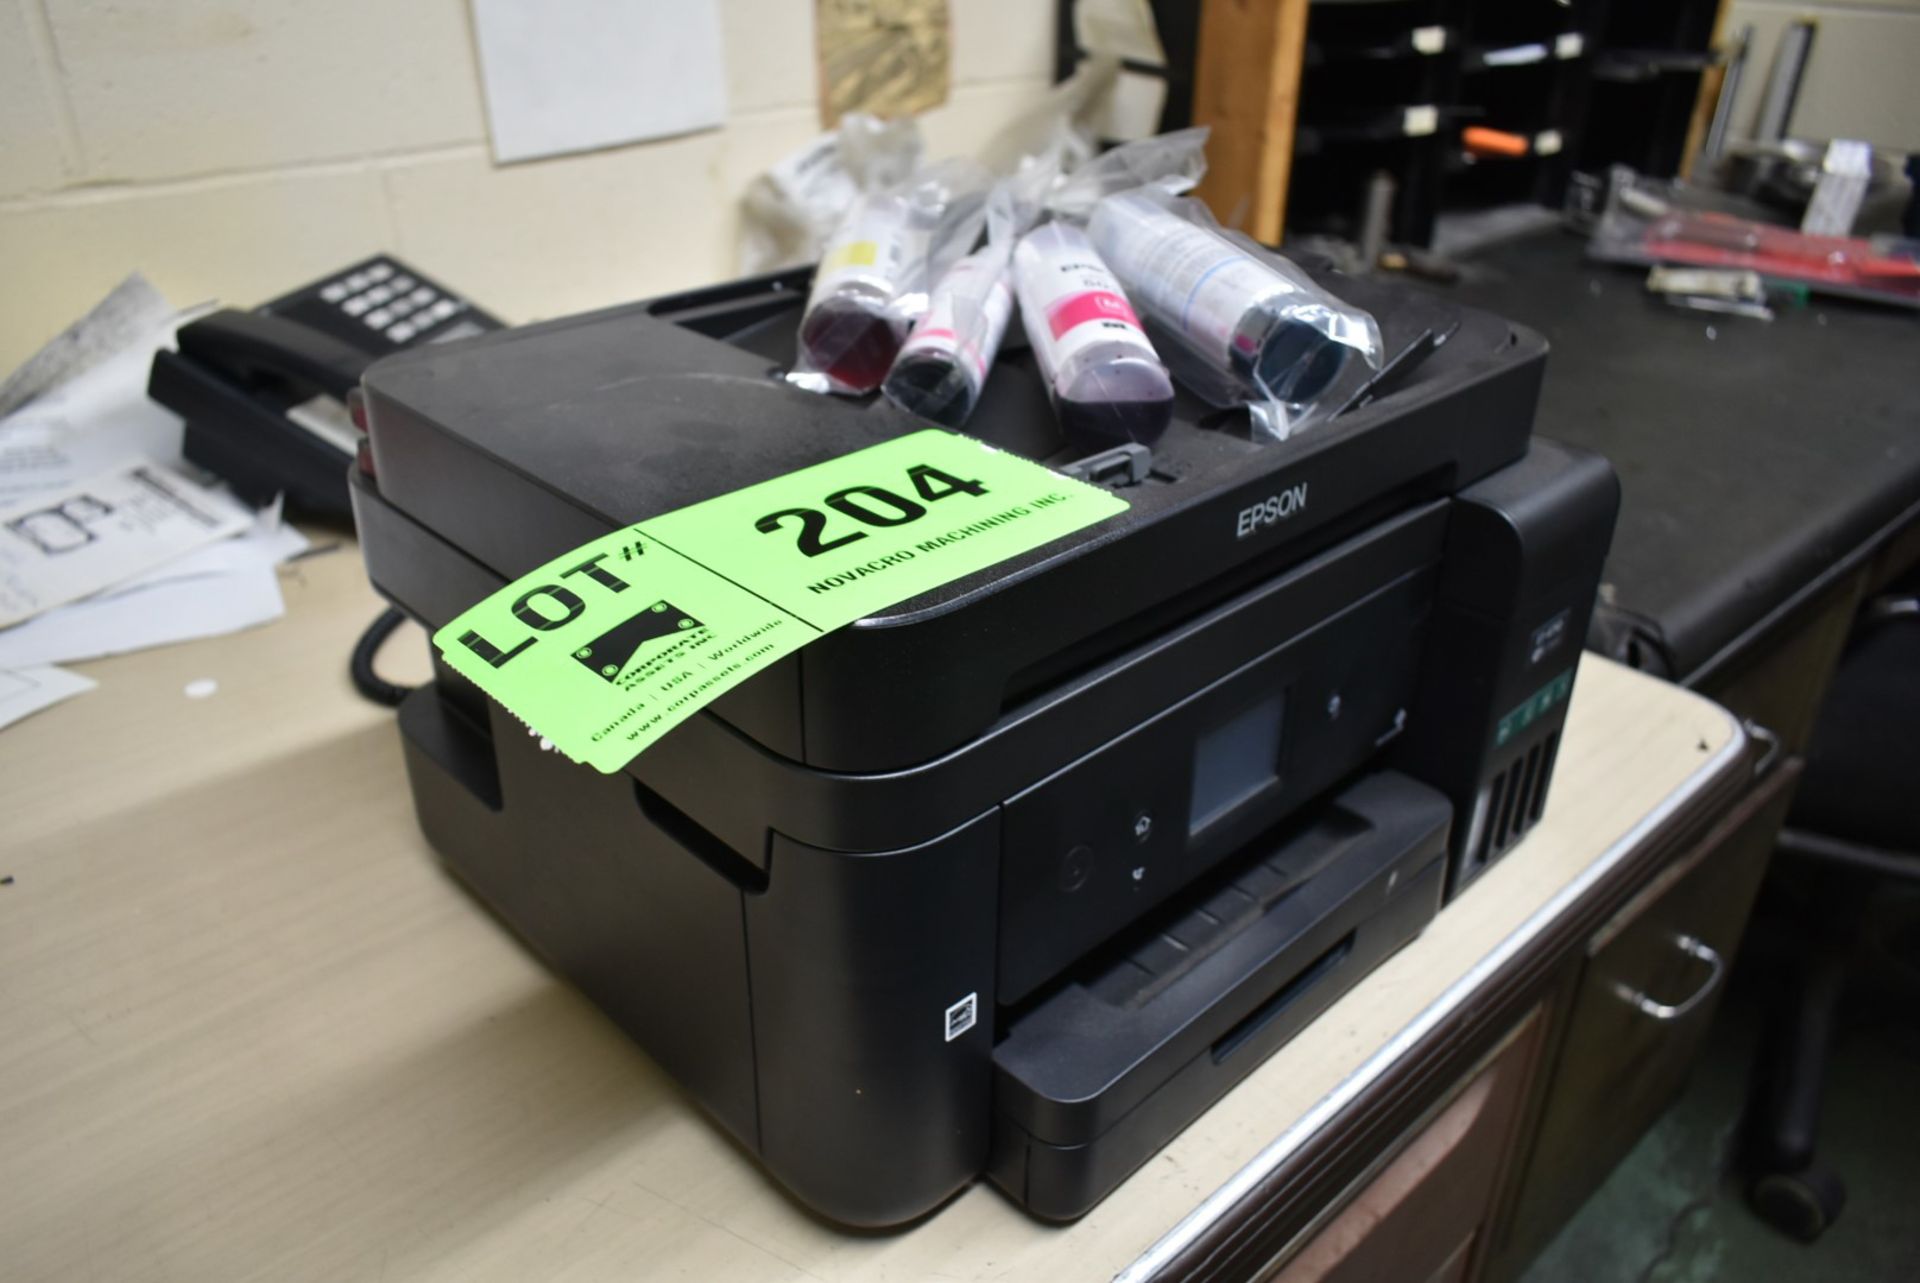 EPSON ET-4750 COMBINATION PRINTER [RIGGING FEE FOR LOT#204 - $25 USD PLUS APPLICABLE TAXES]